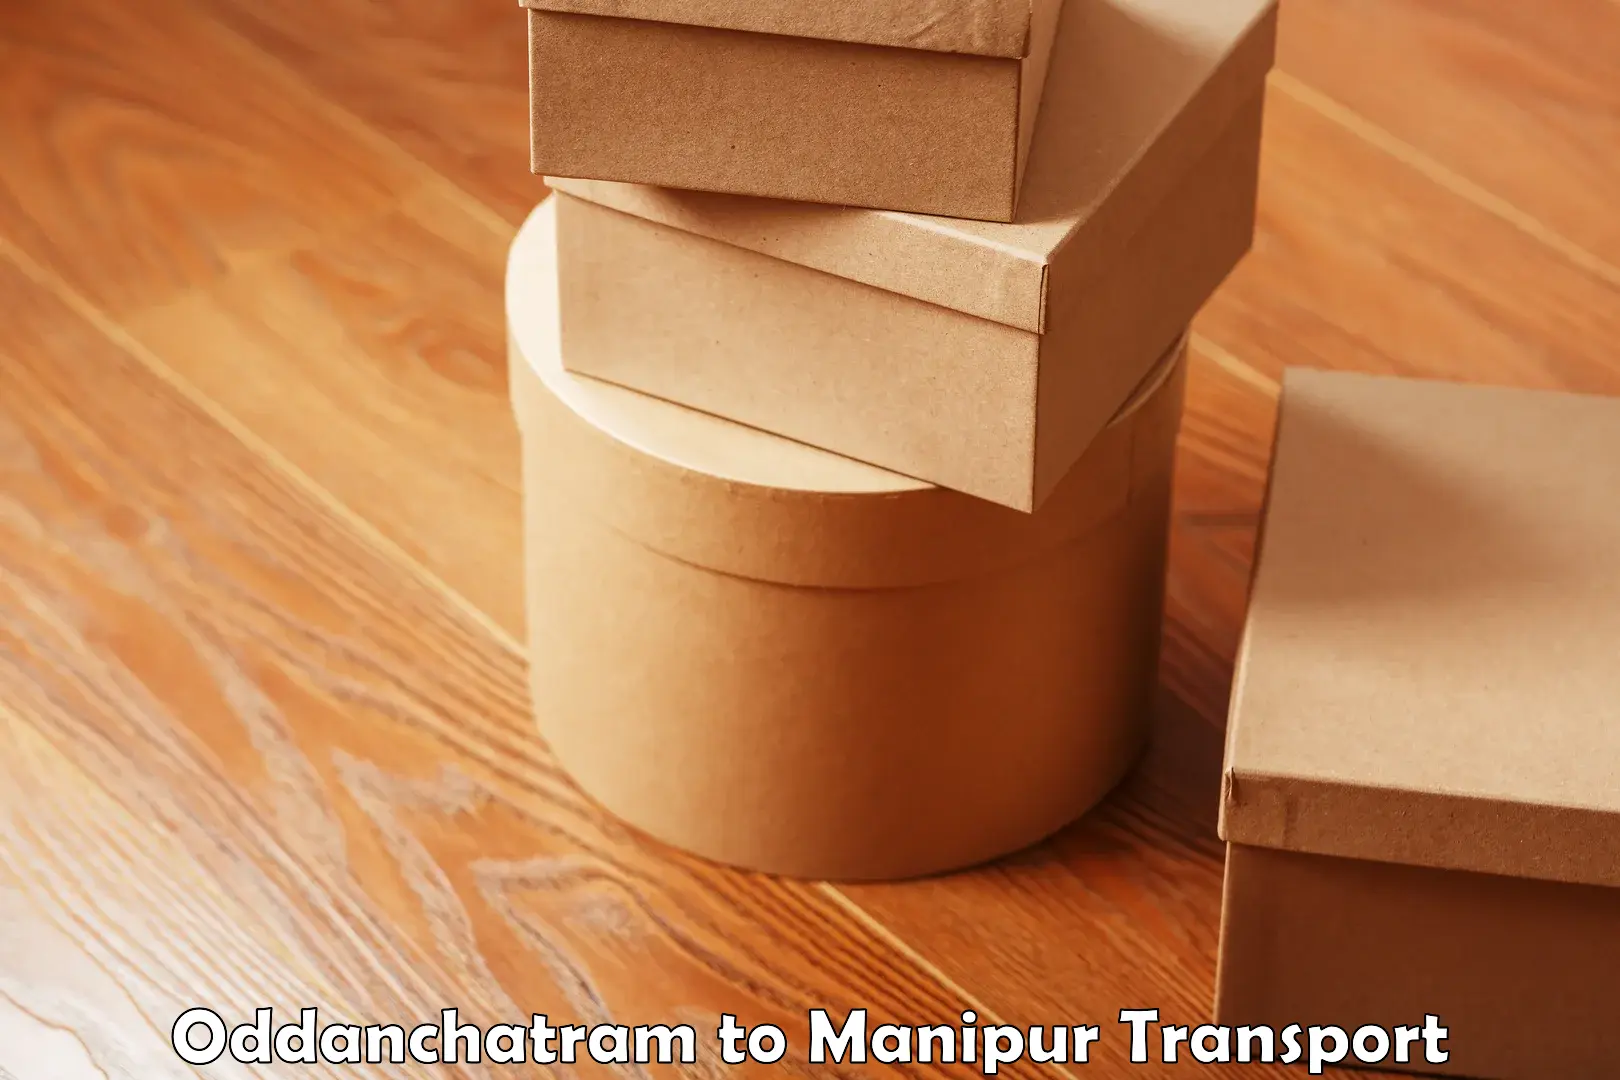 Truck transport companies in India Oddanchatram to Manipur